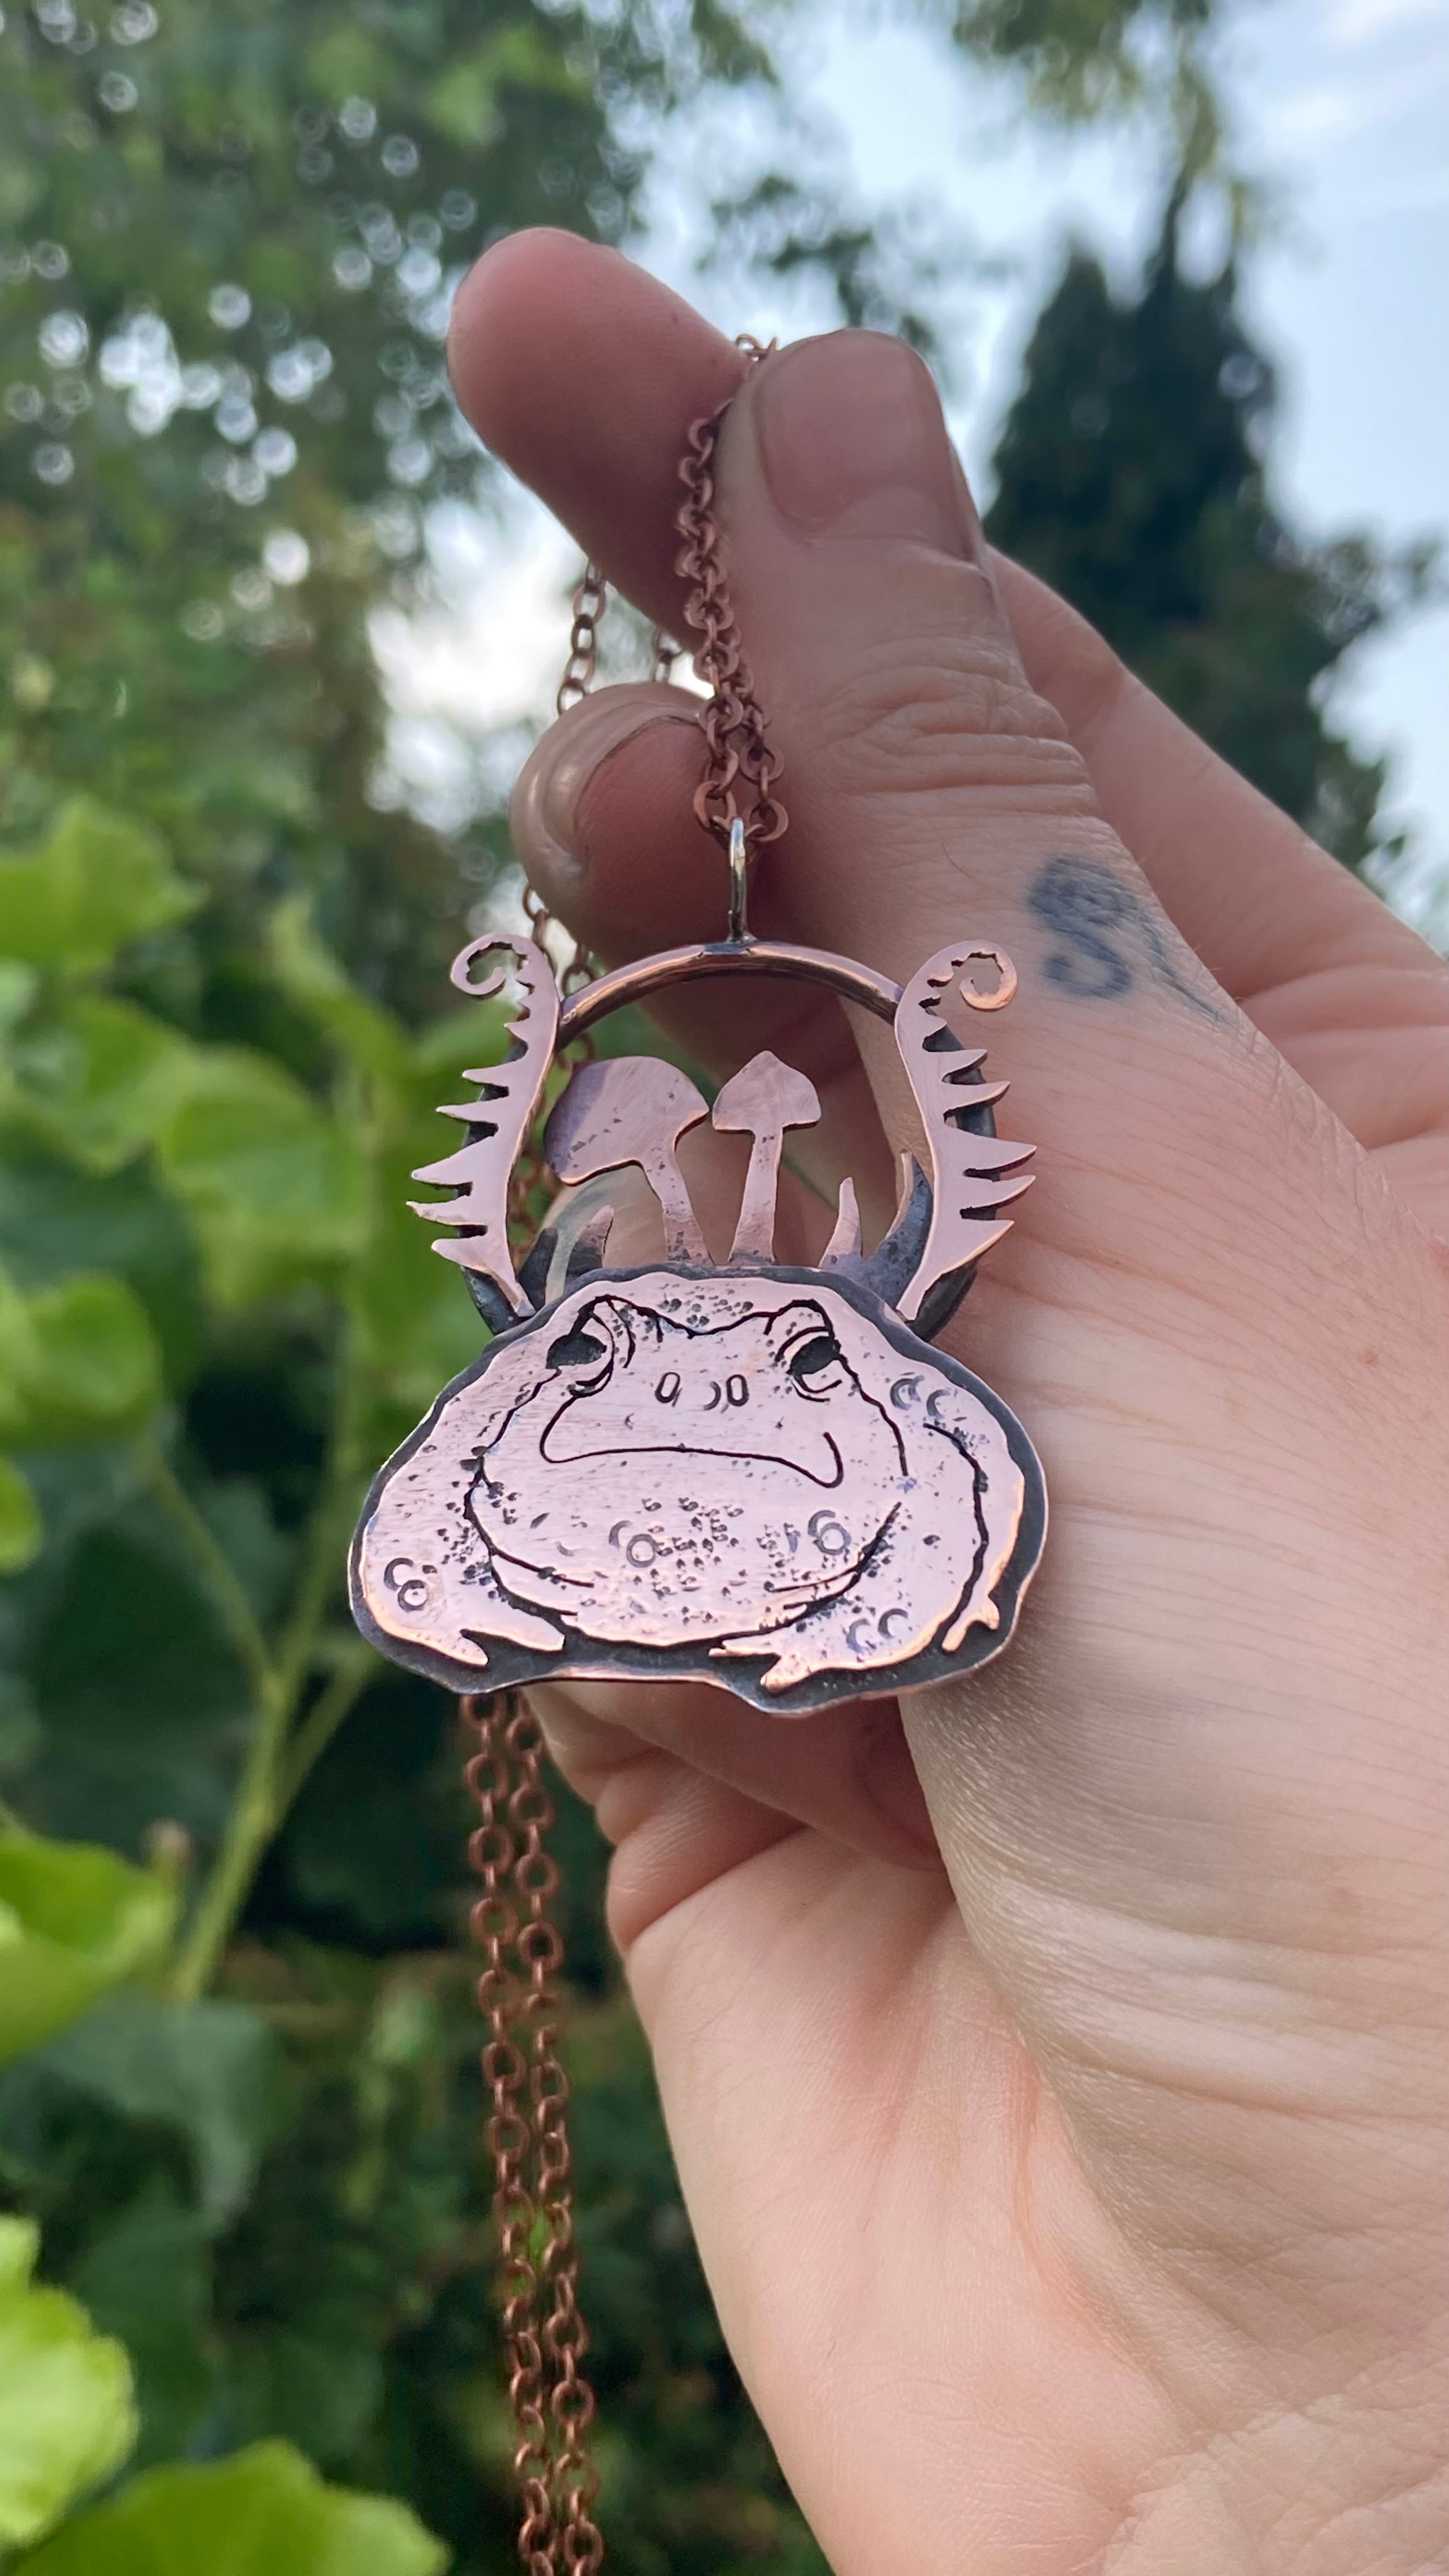 WISE OLD TOAD Handmade Recycled Copper Necklace